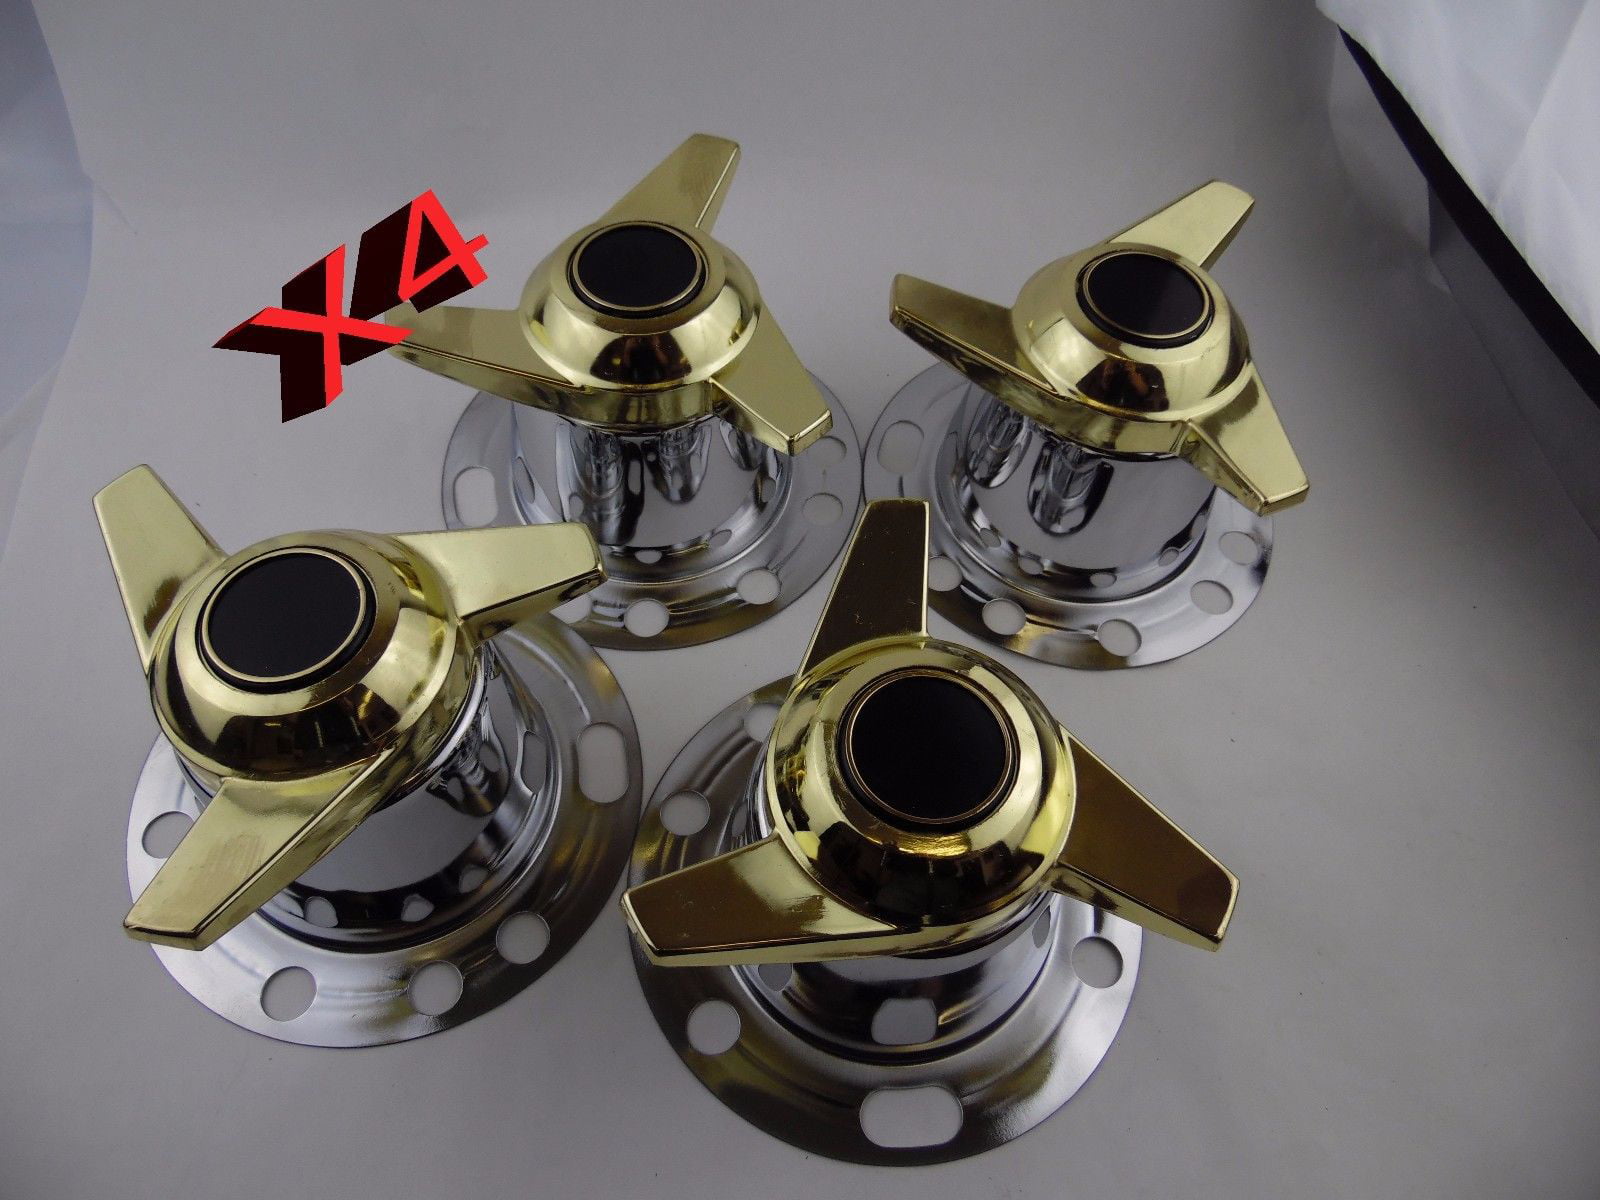 3 Wing 1/24 Wire Rims Wheels Model Lot of 3 Gold Chrome Knock Offs Spinners 2 